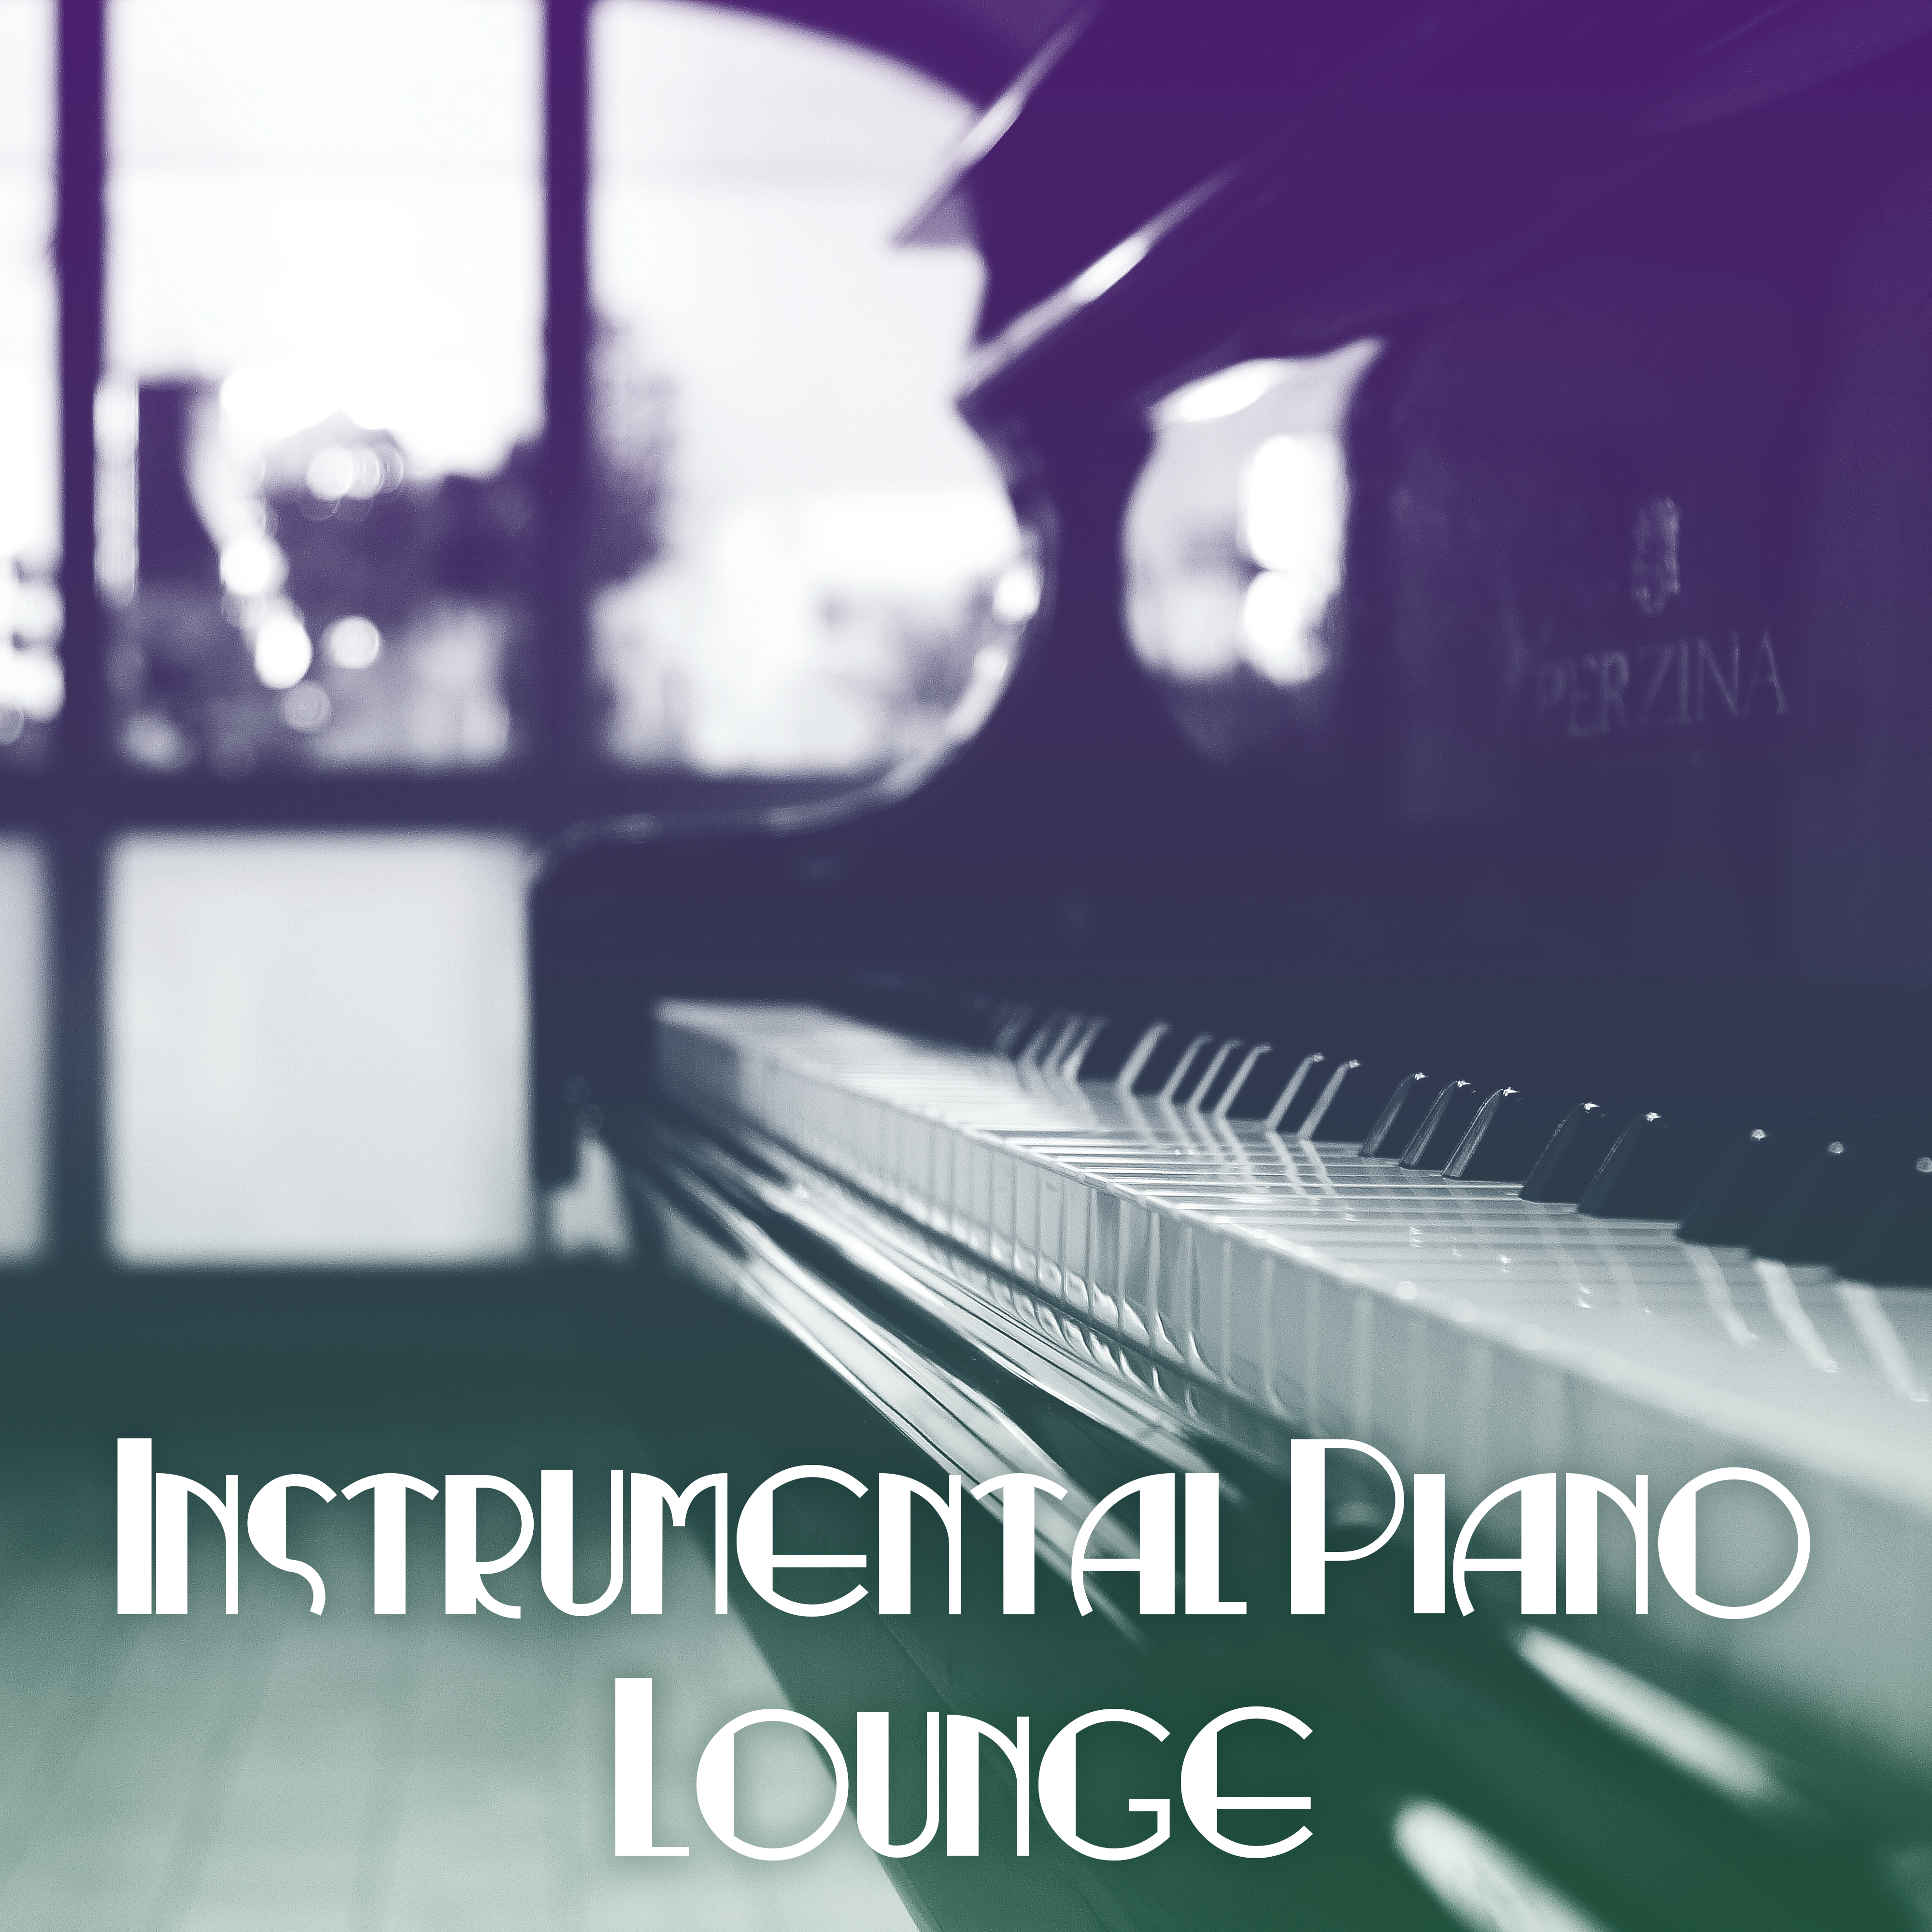 Instrumental Piano Lounge  – Mellow Sounds of Jazz for Restaurant & Cafe, Jazz Club & Bar, Backround Music